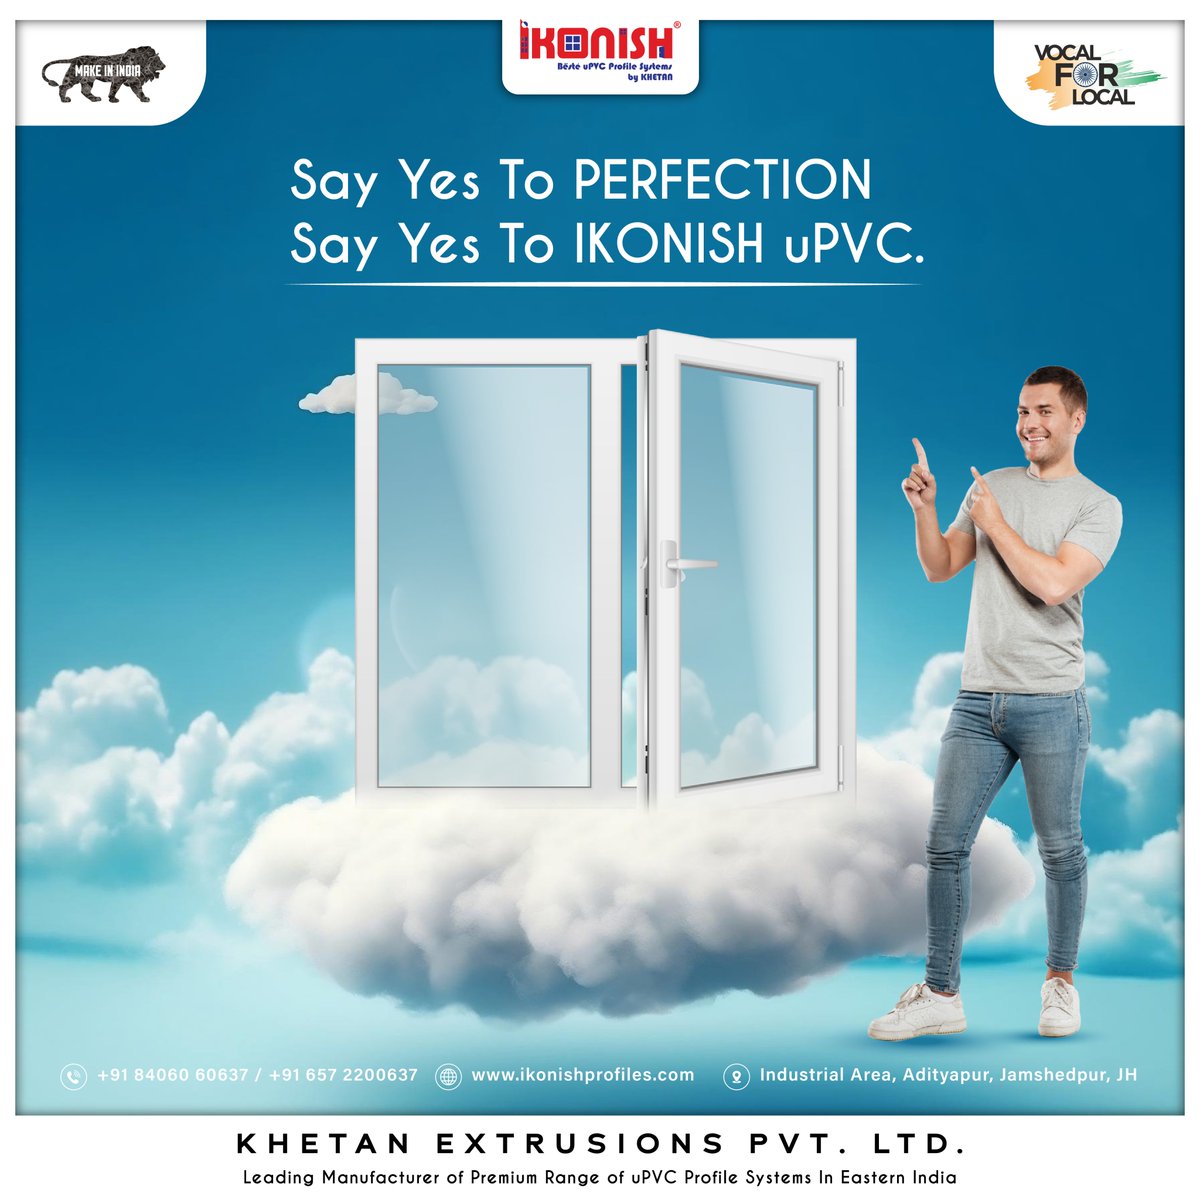 Embrace perfection with every detail! Say yes to IKONISH uPVC, where excellence meets durability. Elevate your space with the best!
.
.
.
.
For more information: ikonishprofiles.com
.
.
.
.
#IKONISHuPVC #PerfectionDefined #HomeUpgrade #QualityMatters